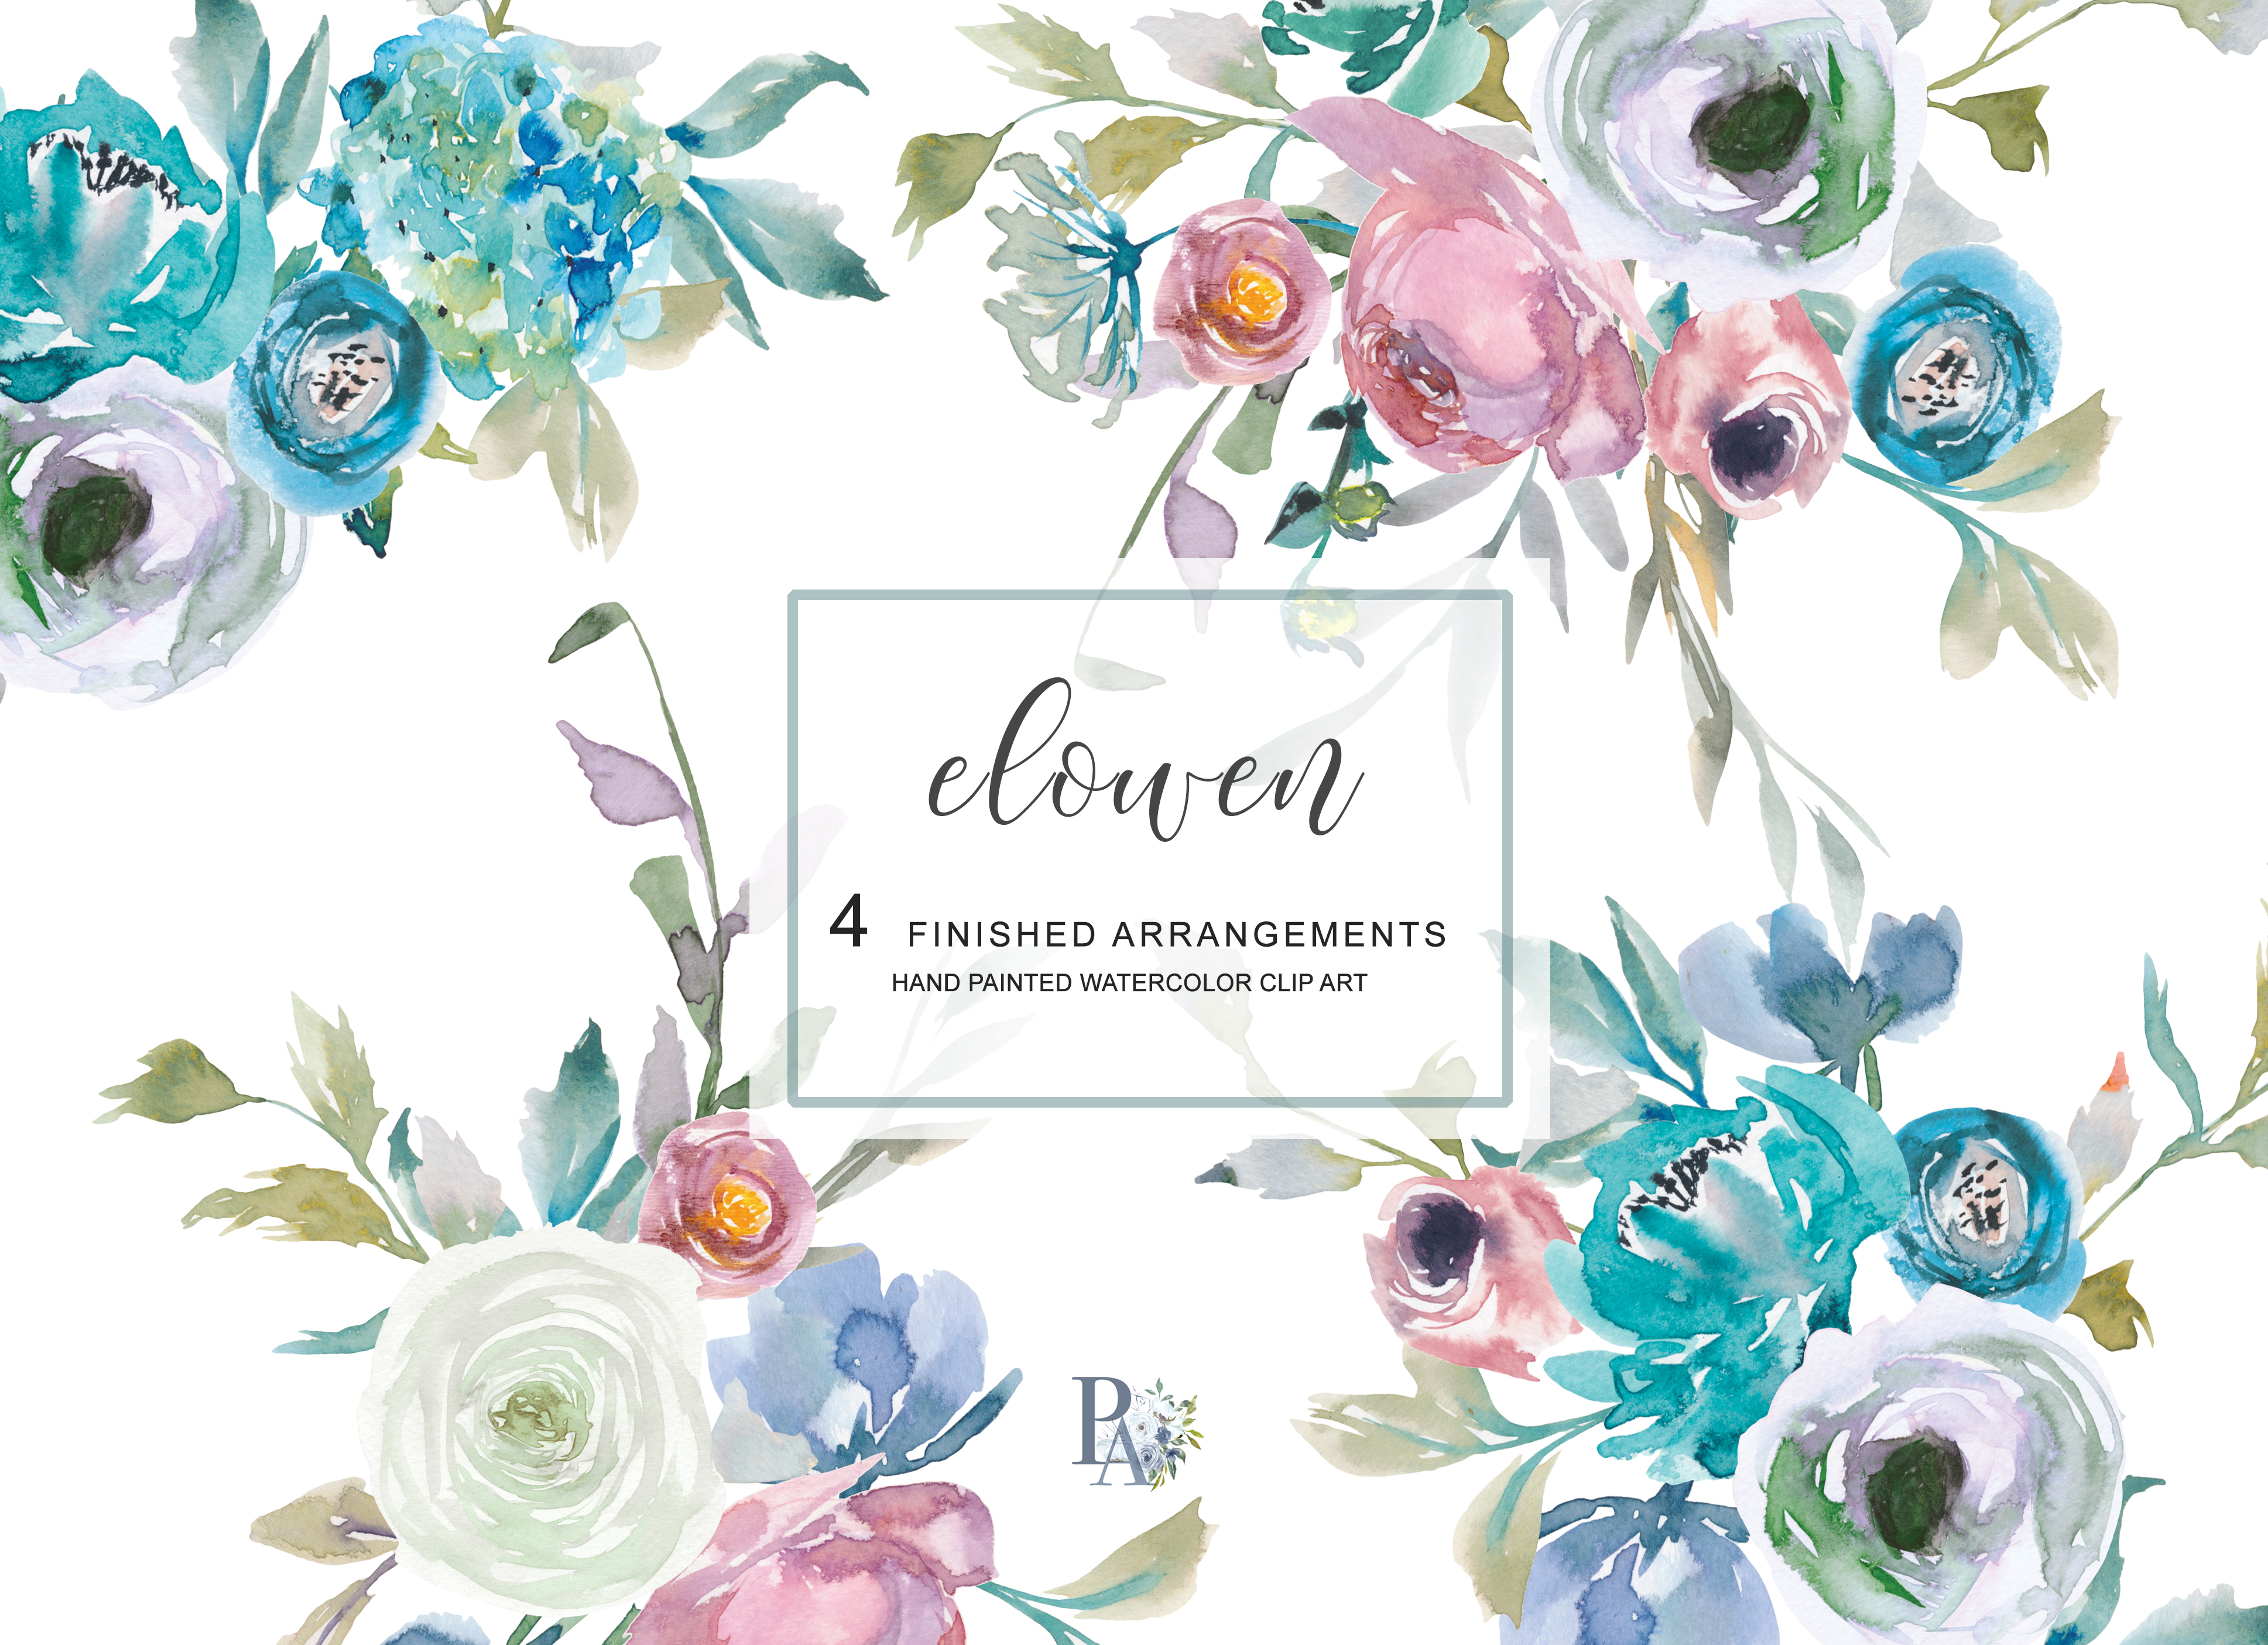 Watercolor Dusty Blue &Turquoise Floral Clipart example image 1.